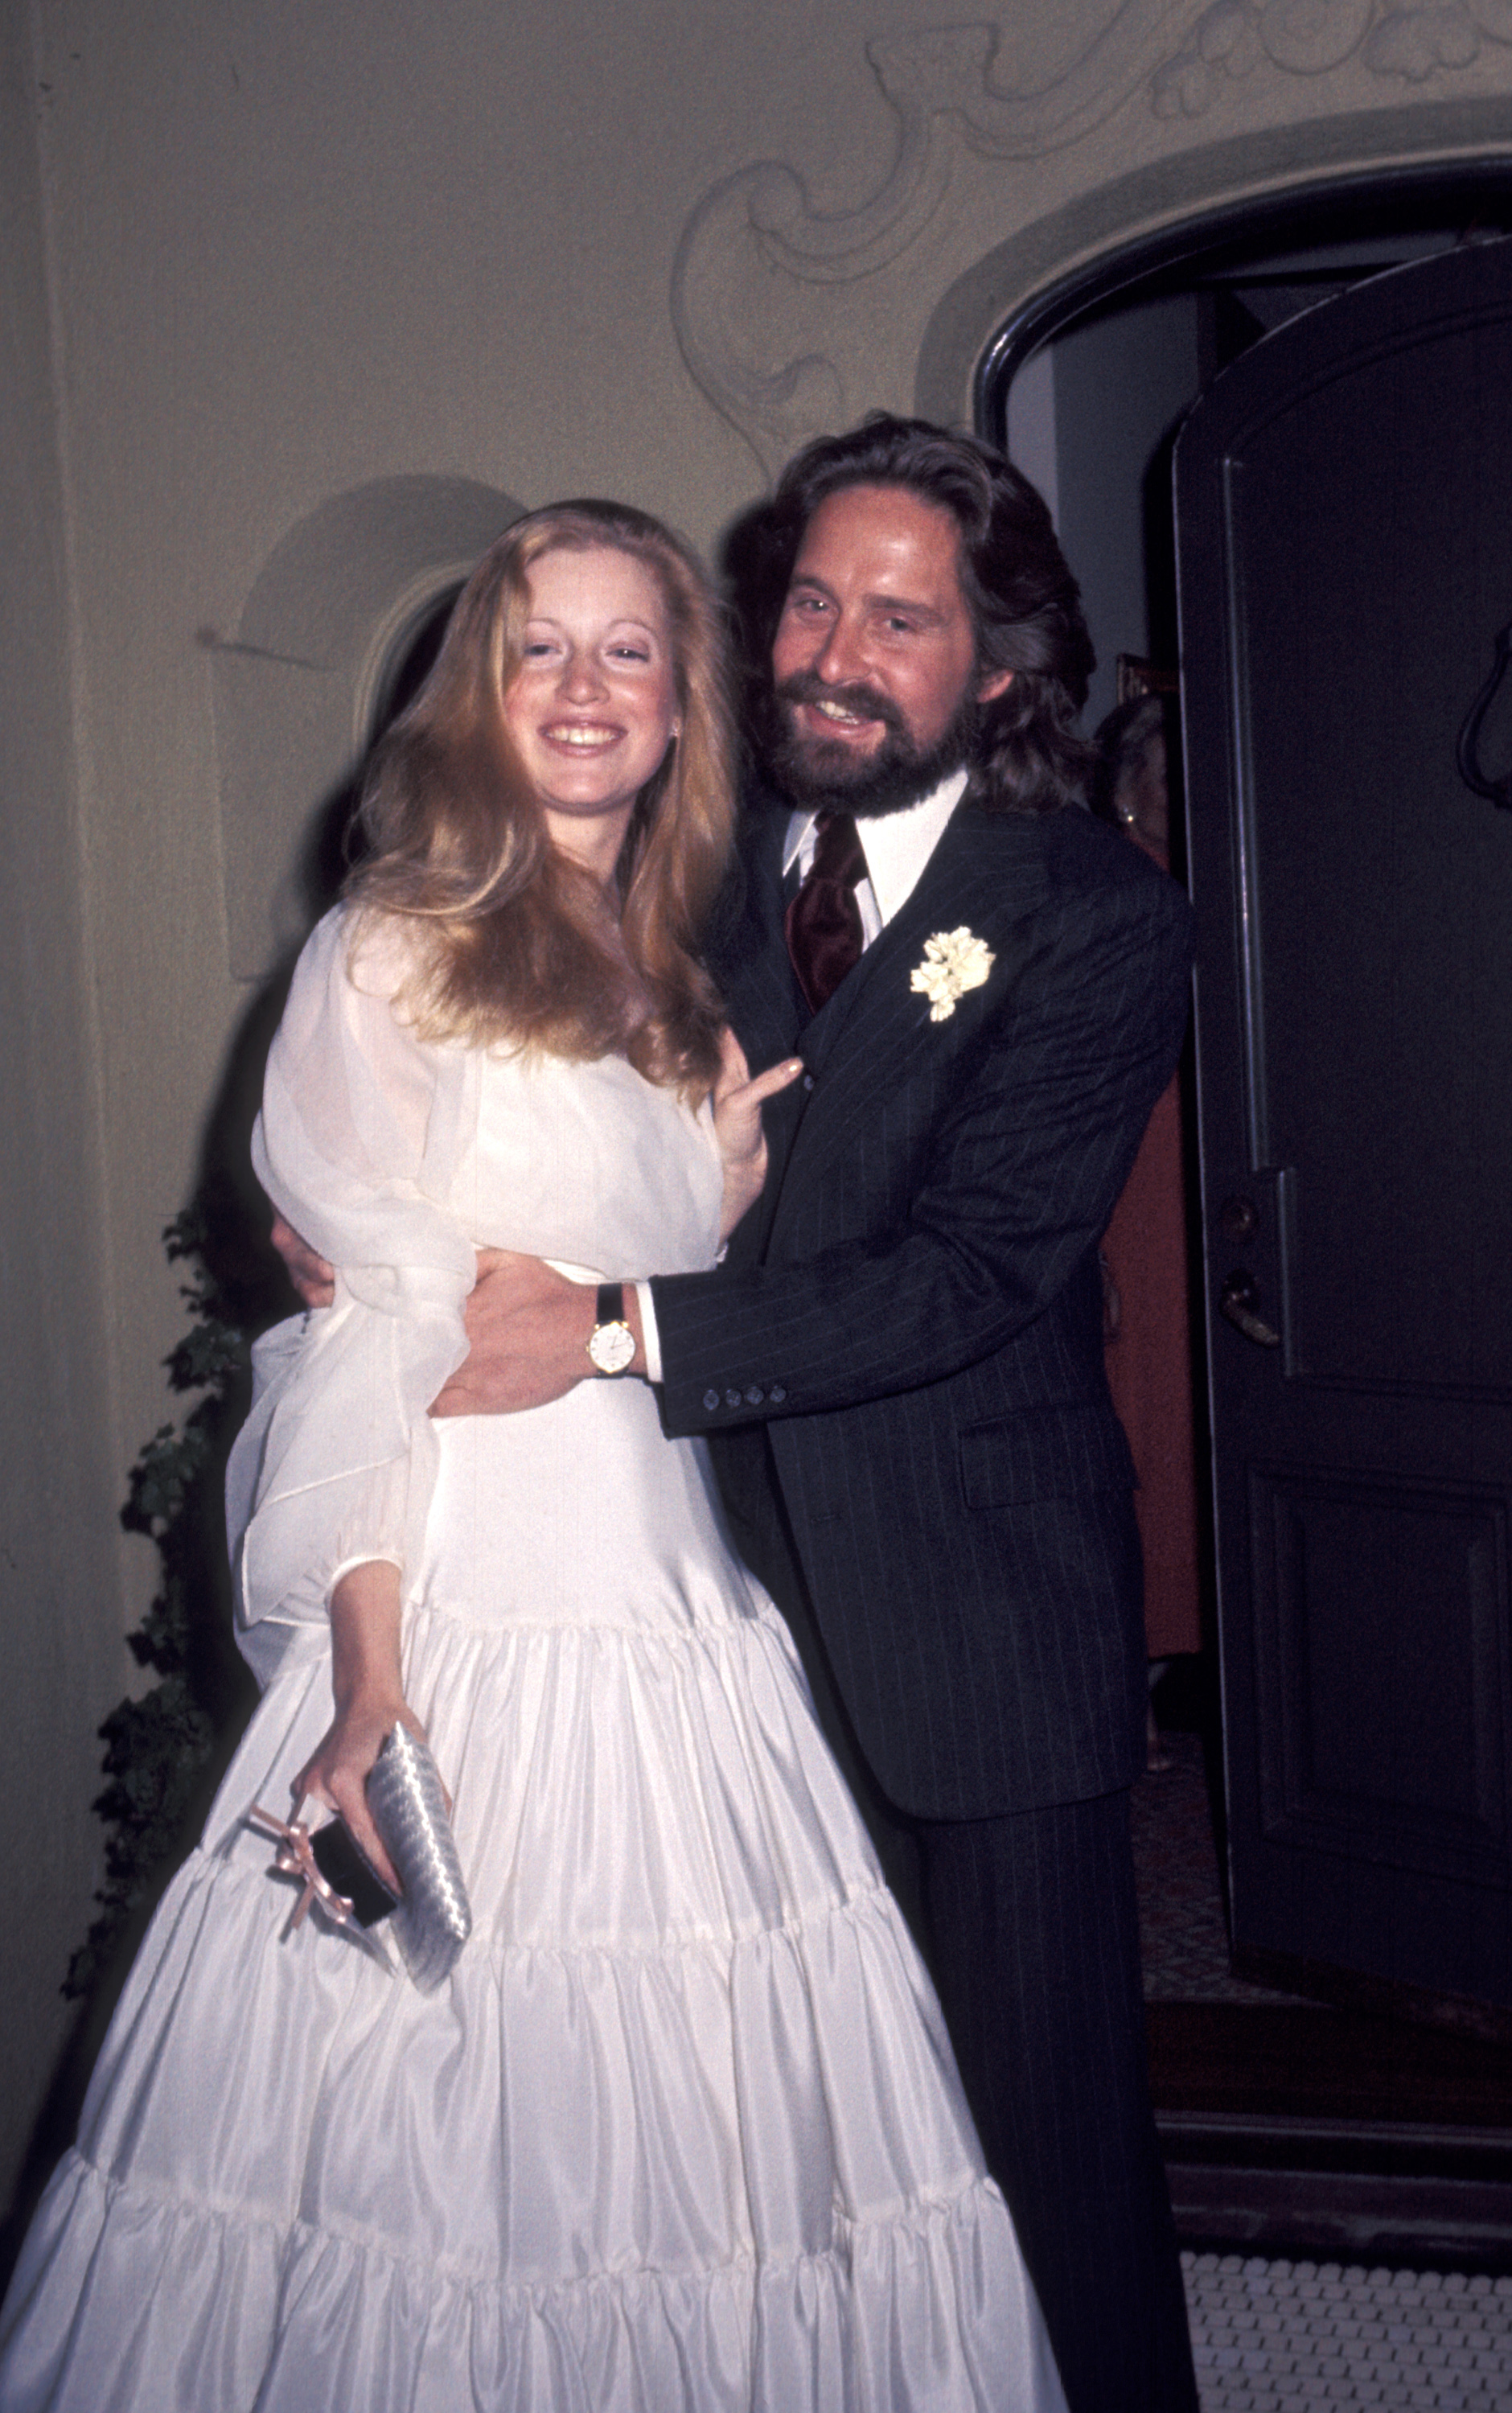 Diandra Luker and Michael Douglas during their wedding reception in 1977. | Source: Getty Images